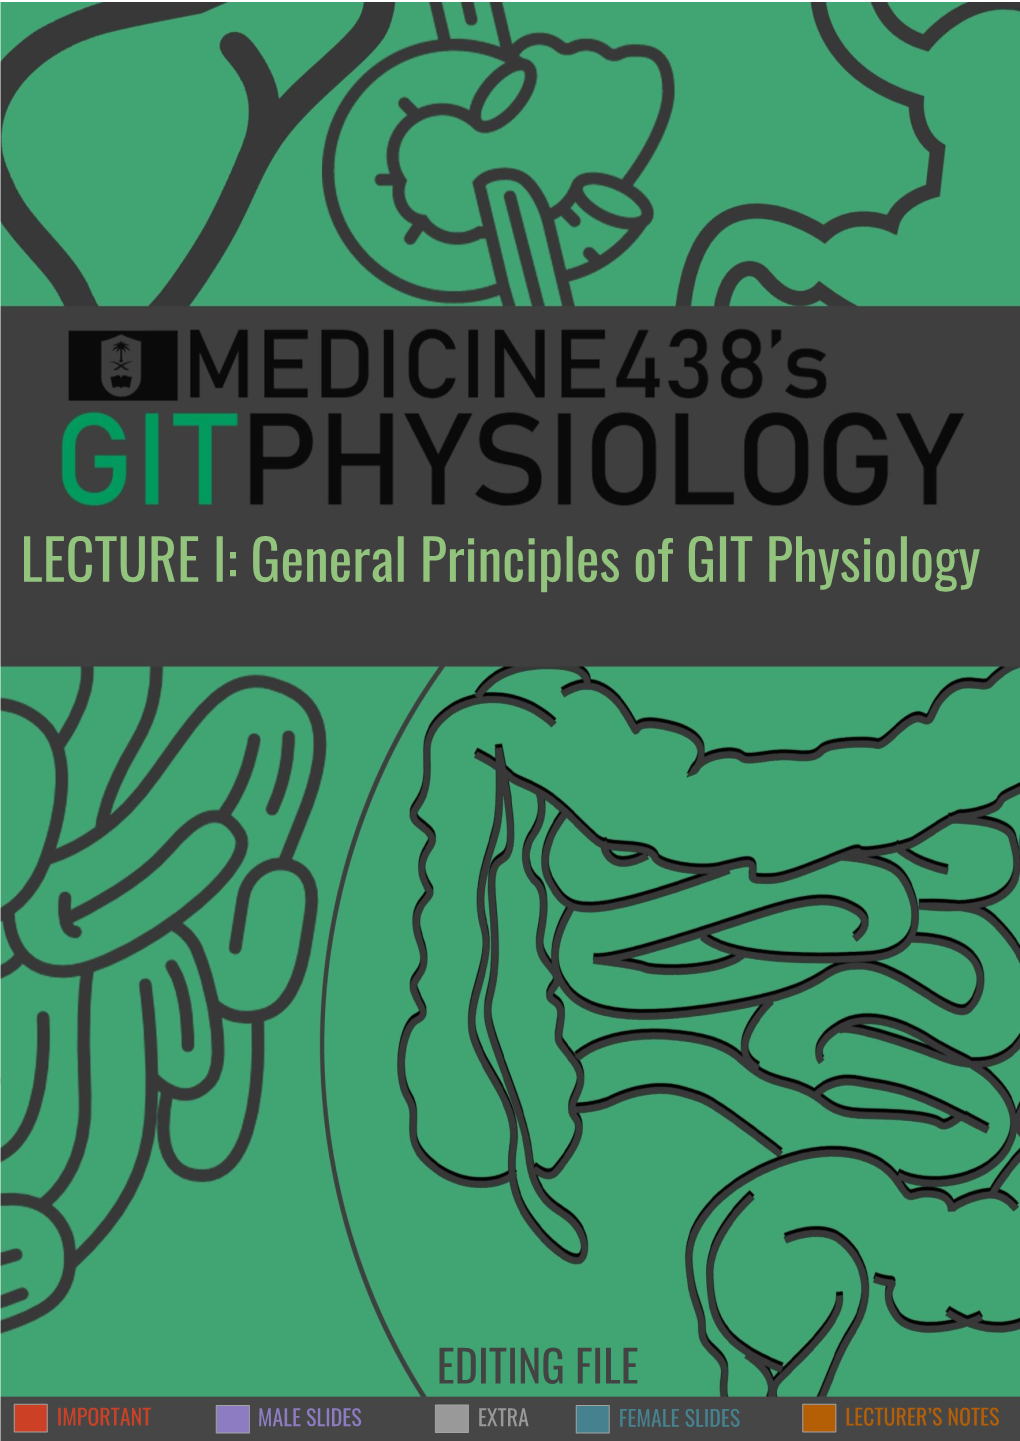 General Principles of GIT Physiology